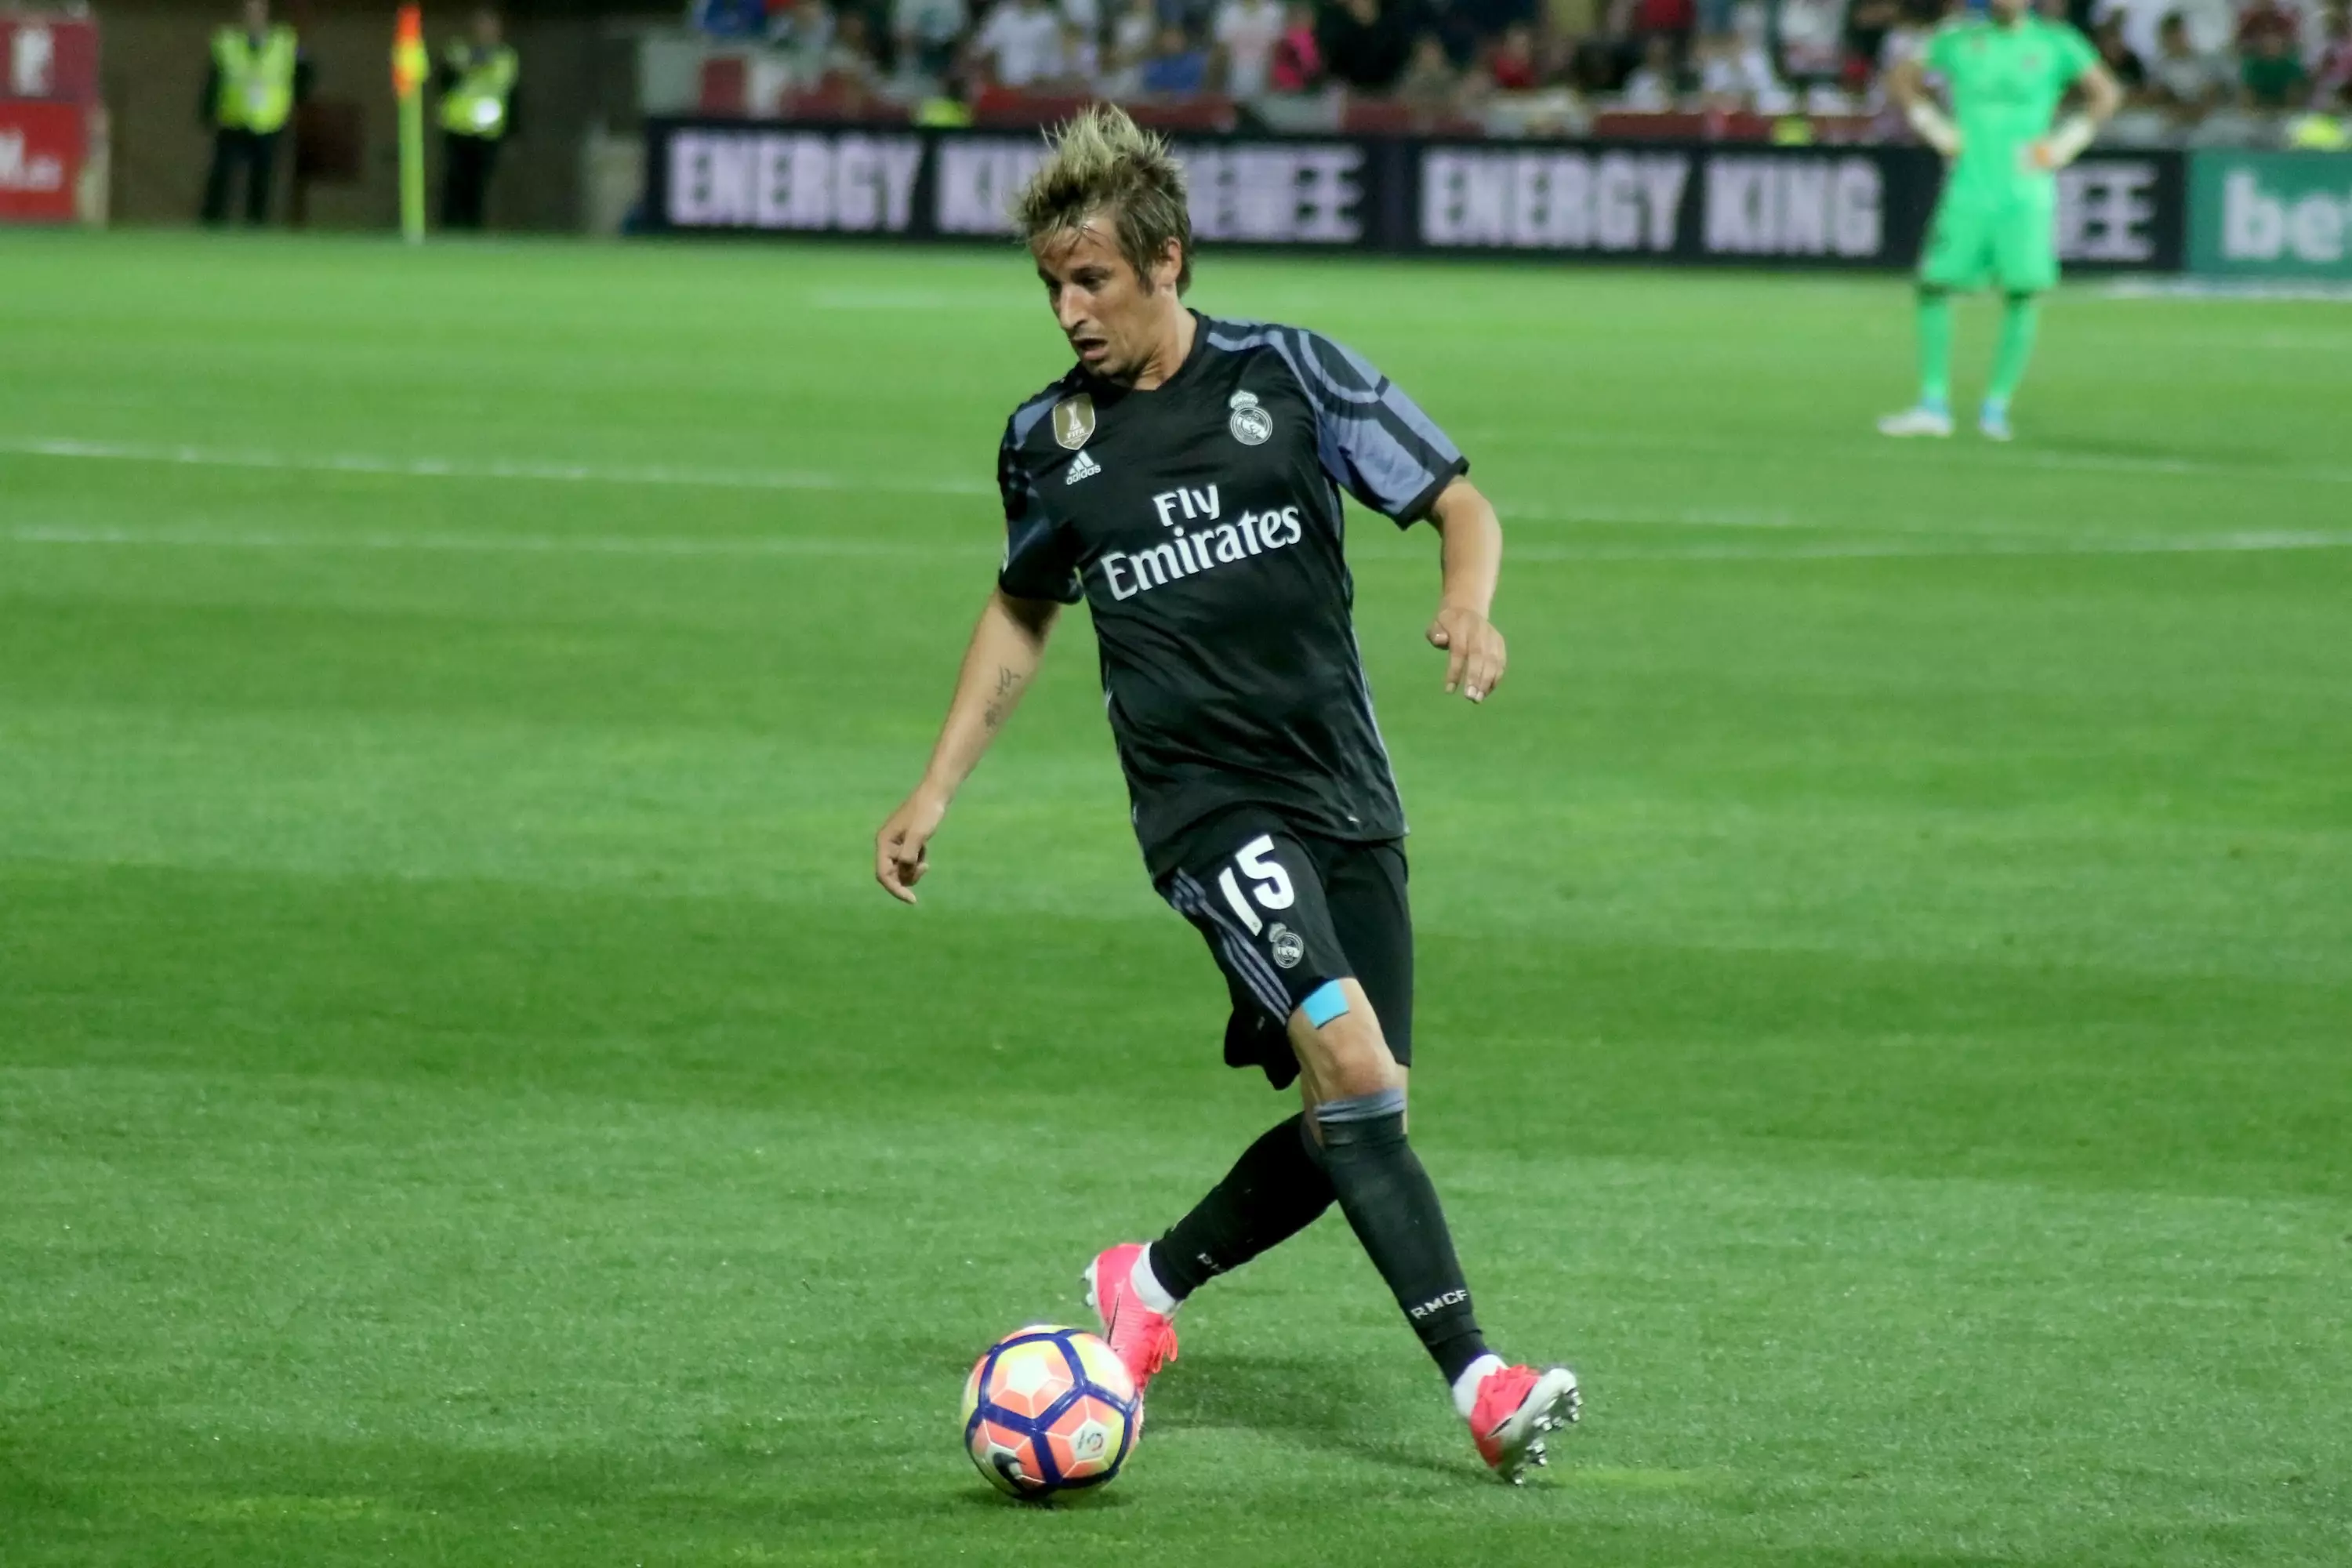 Coentrao won't be at the World Cup. Image: PA Images